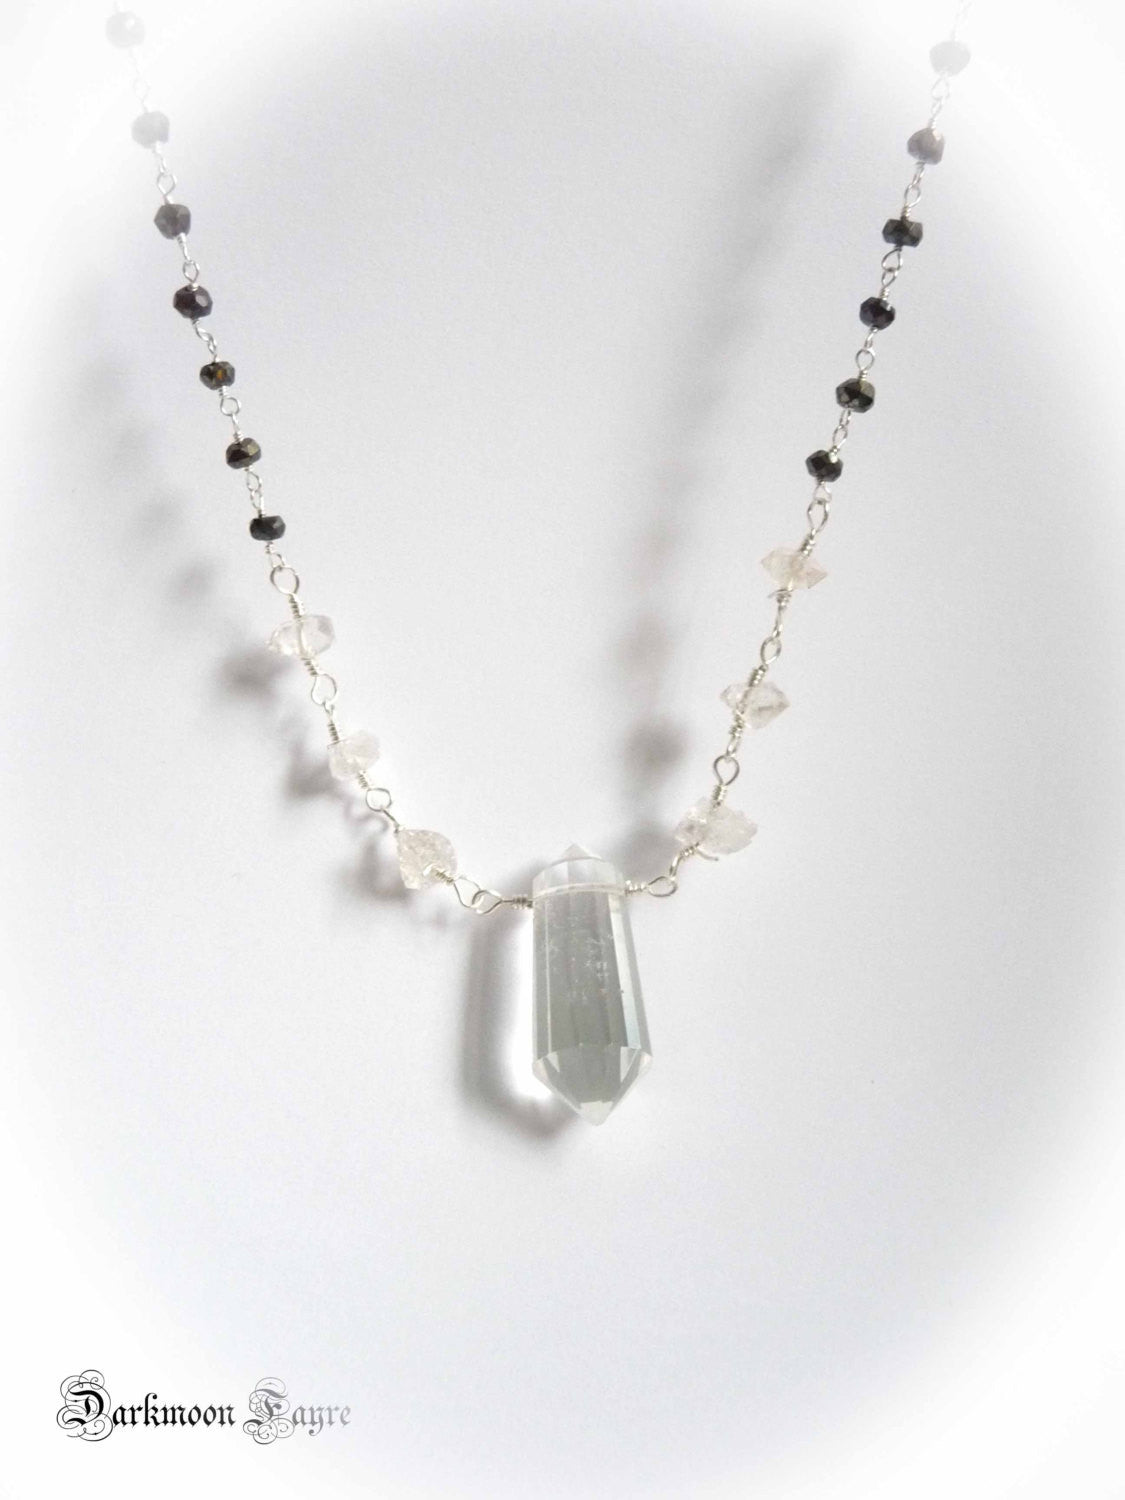 Herkimer Diamond & Clear Quartz Point Necklace. Black Spinel Rosary Chain. All 925 Sterling Silver - Darkmoon Fayre